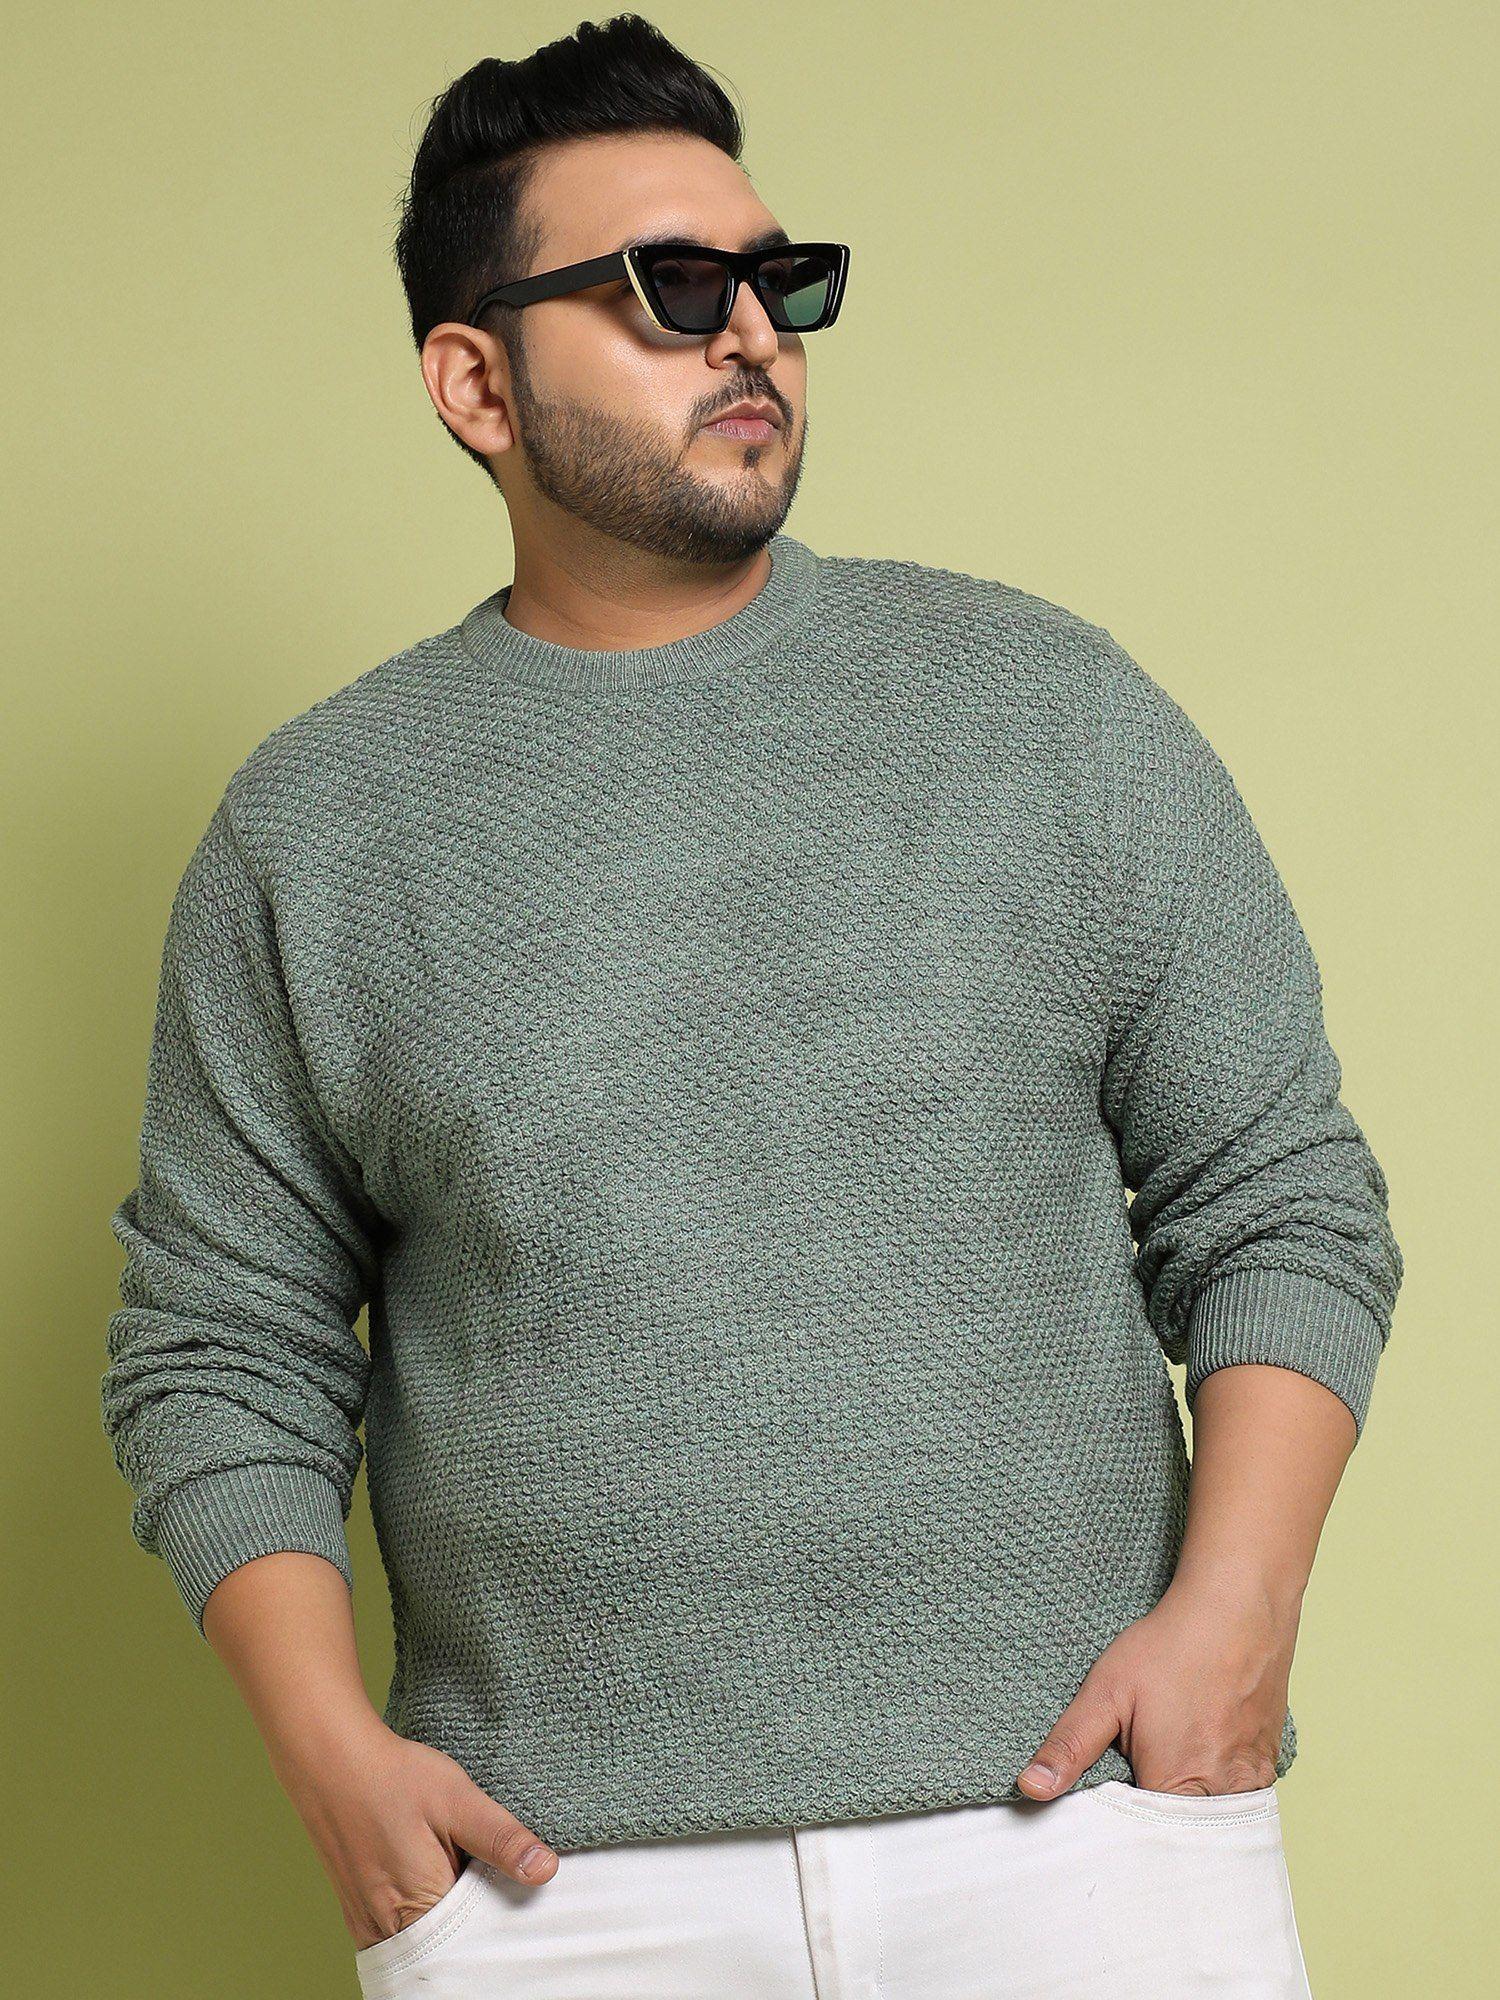 men's-olive-textured-knit-pullover-sweater